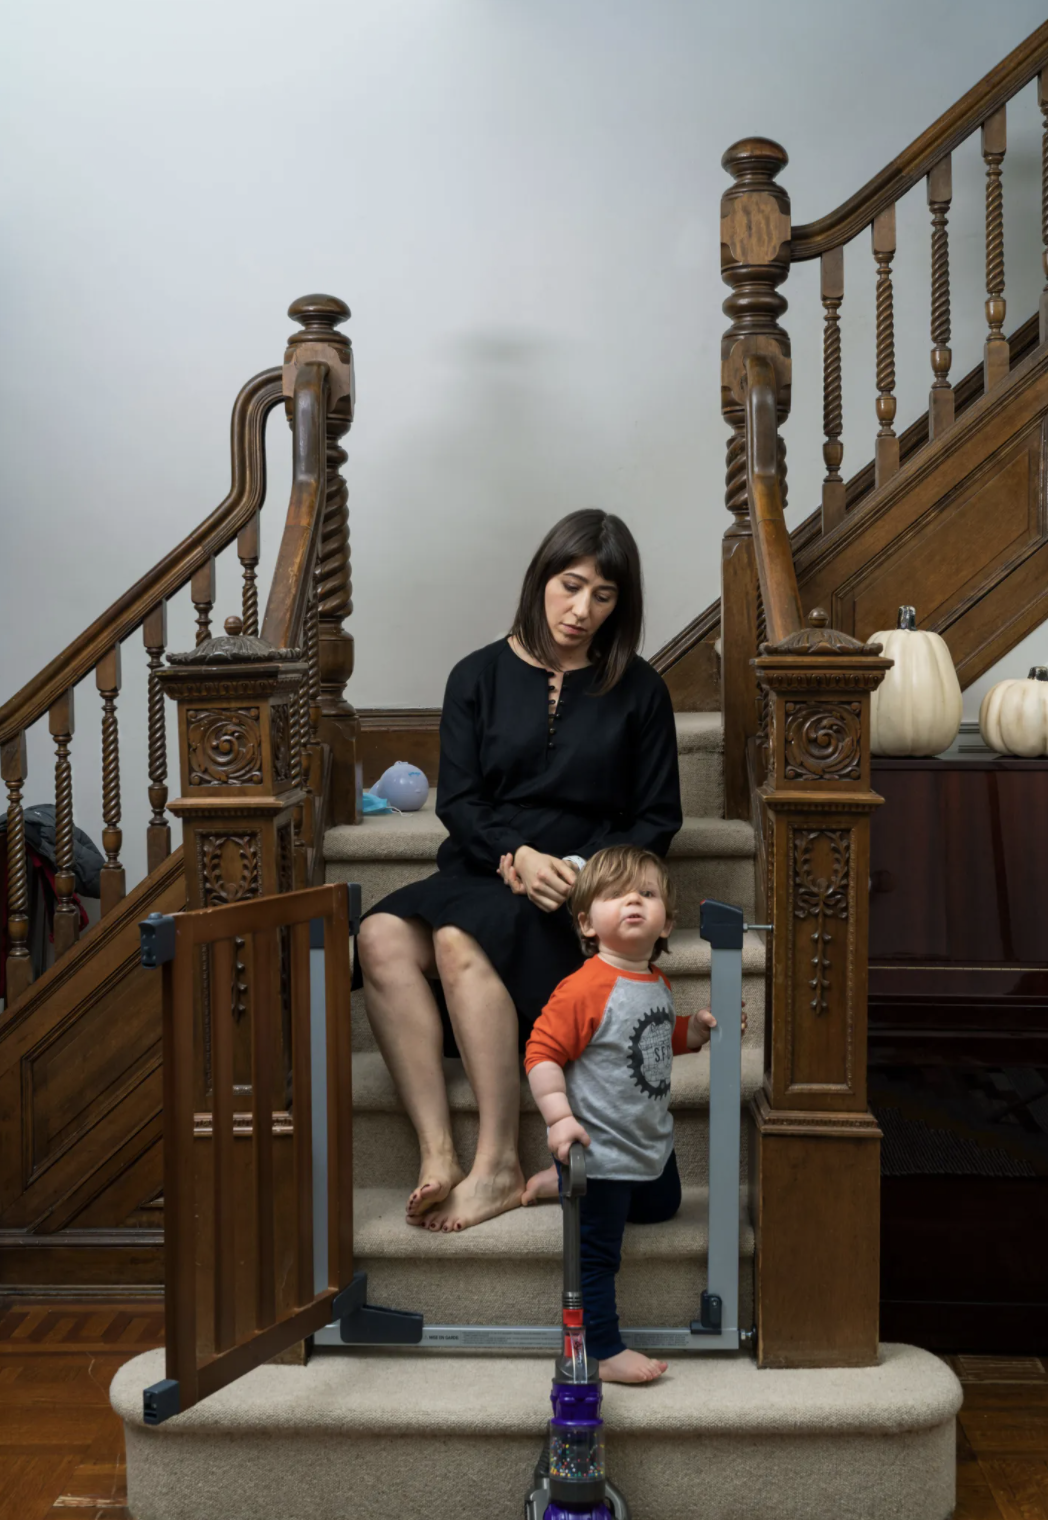   Justine Kurland  photographed Allison and her son for New York Magazine’s cover story about women losing their jobs during 2020 in January 2021.  